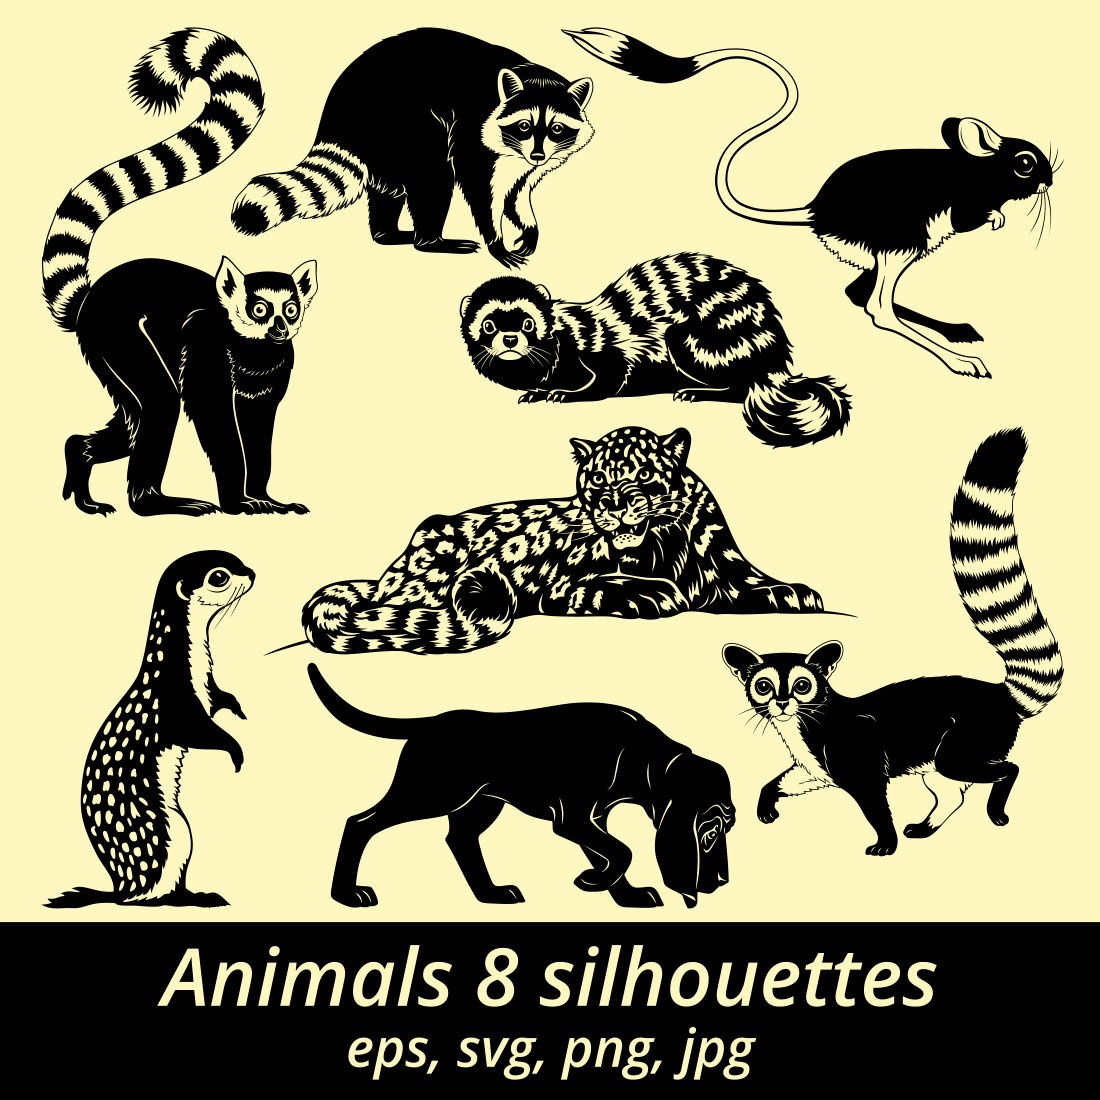 Animals Silhouettes SVG cover image.